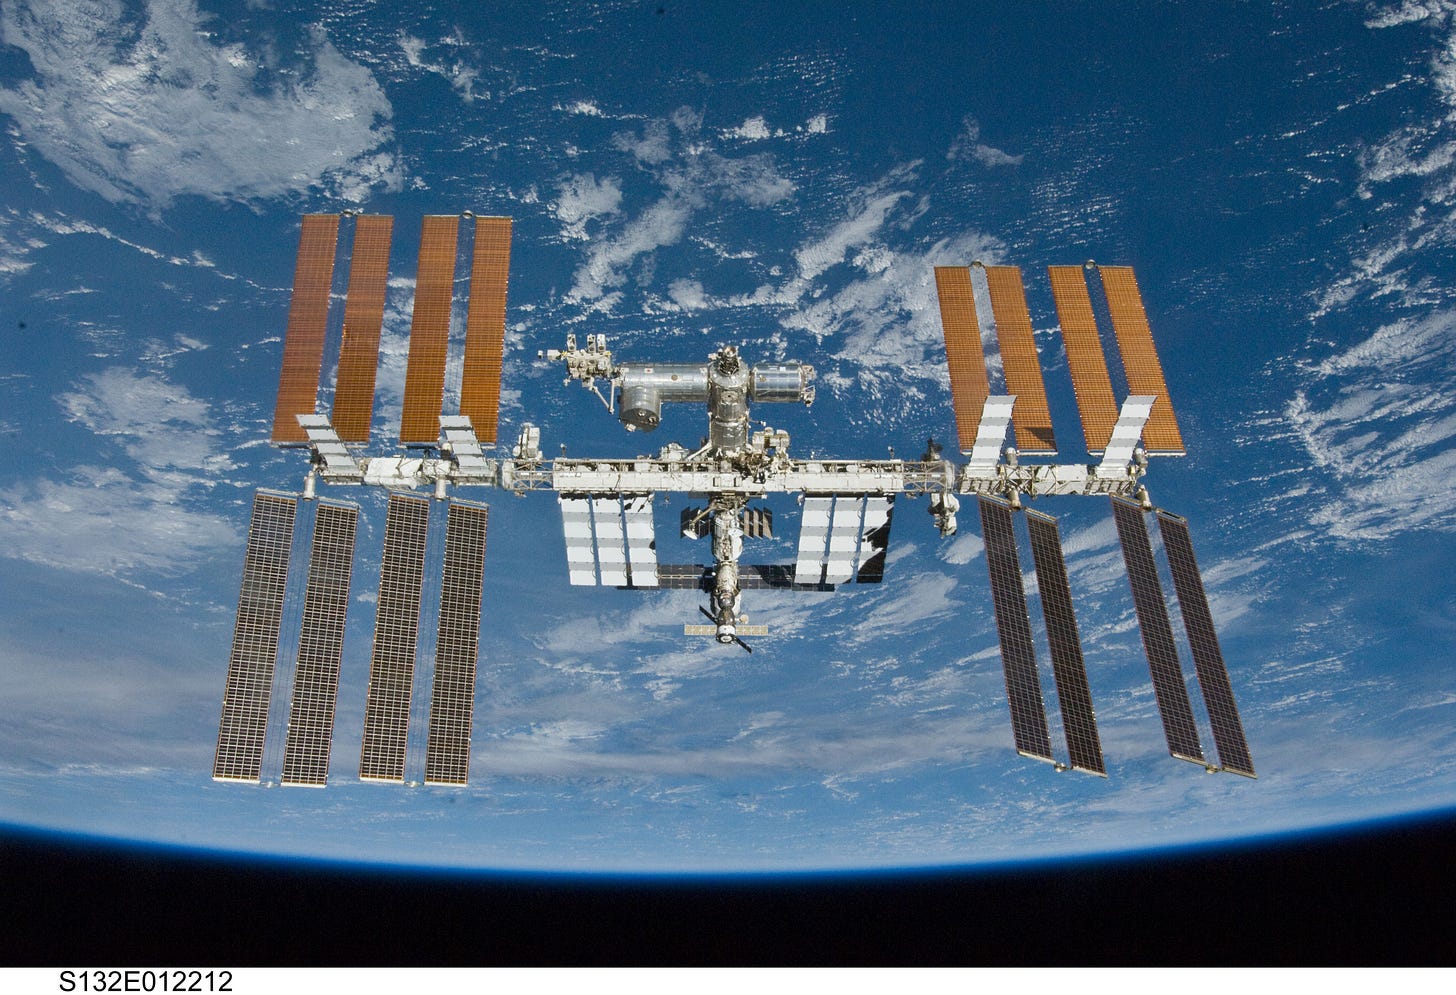 International Space Station Overview - NASA